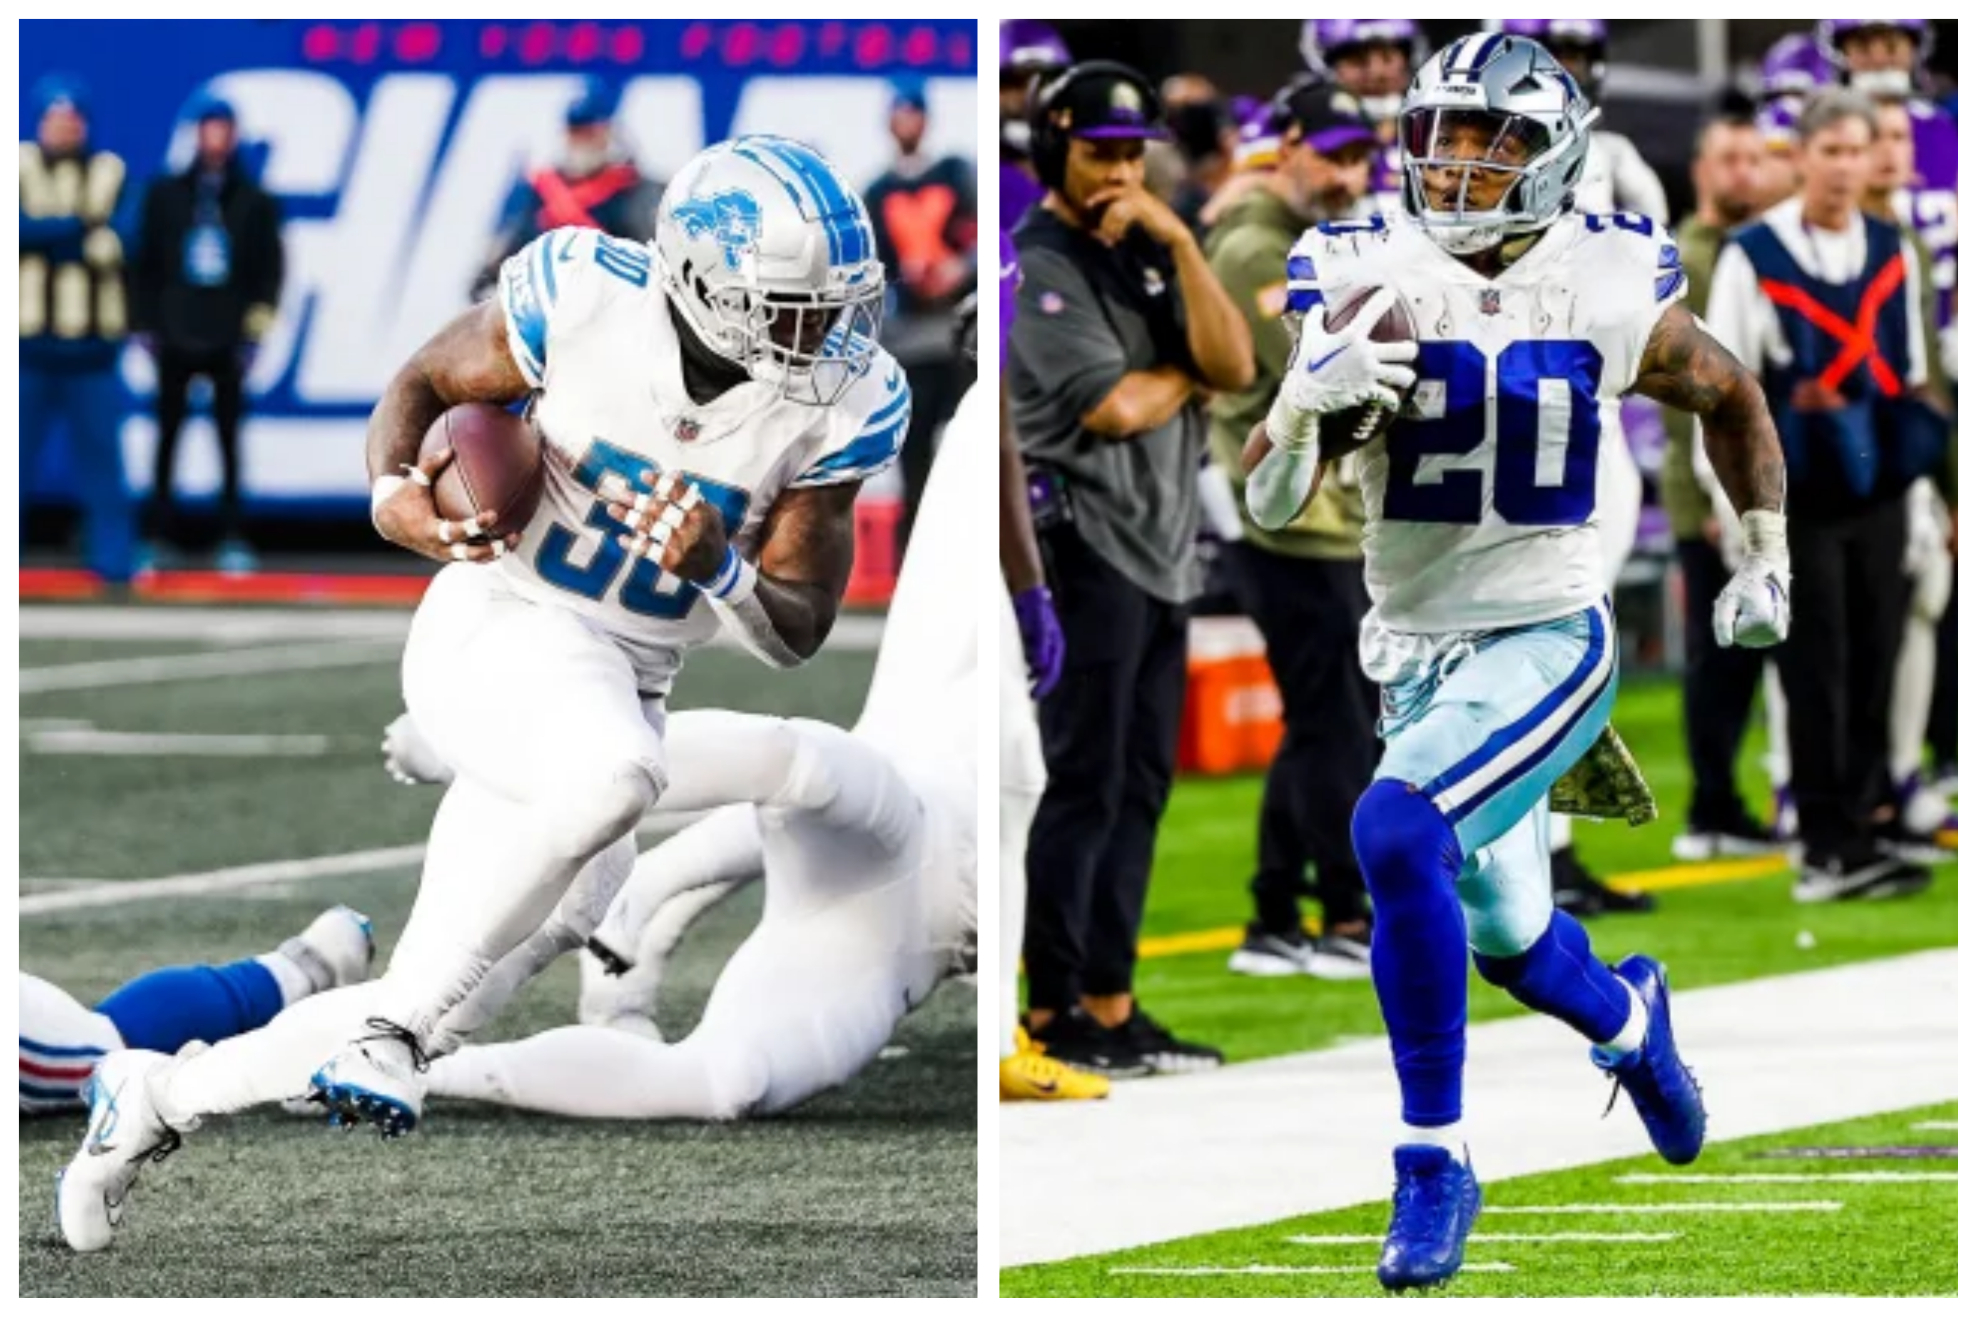 The Detroit Lions and the Dallas Cowboys play every year on Thanksgiving.